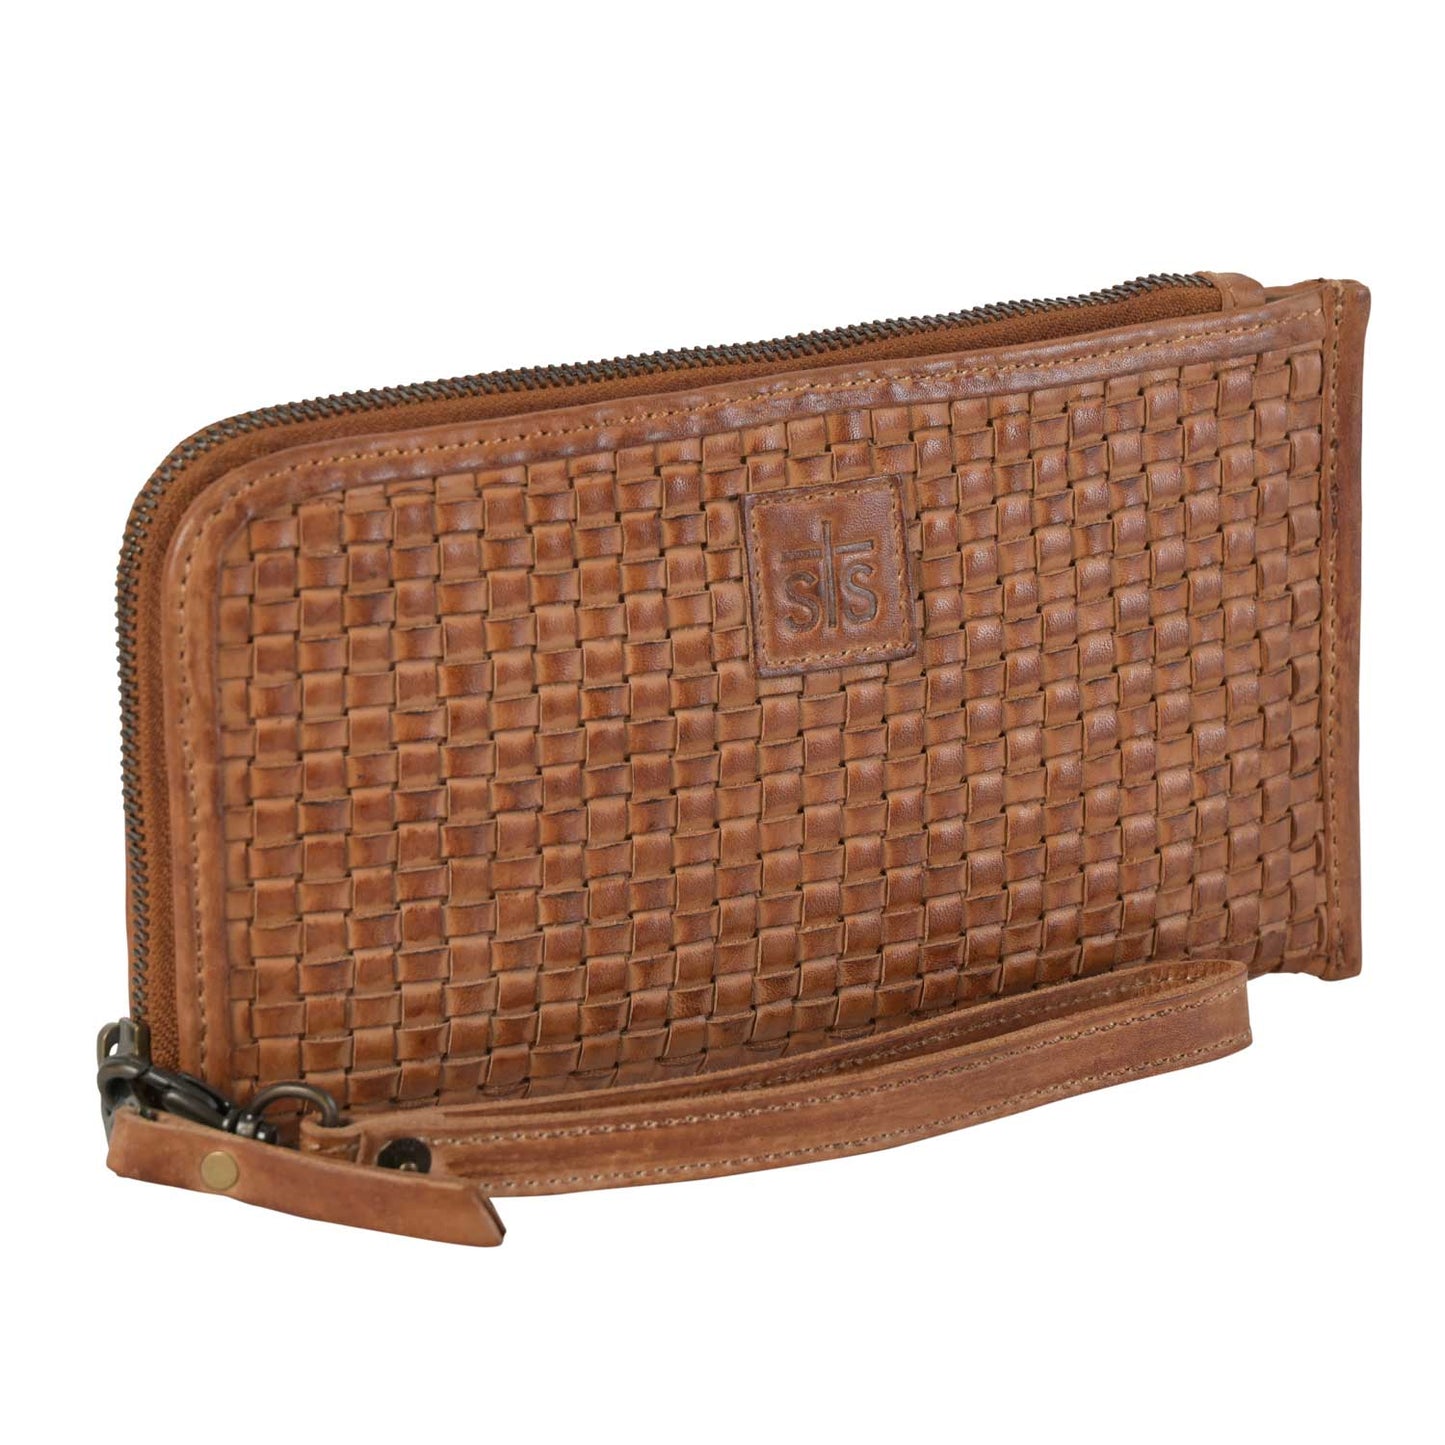 Sweet Grass Woven Leather Clutch By STS